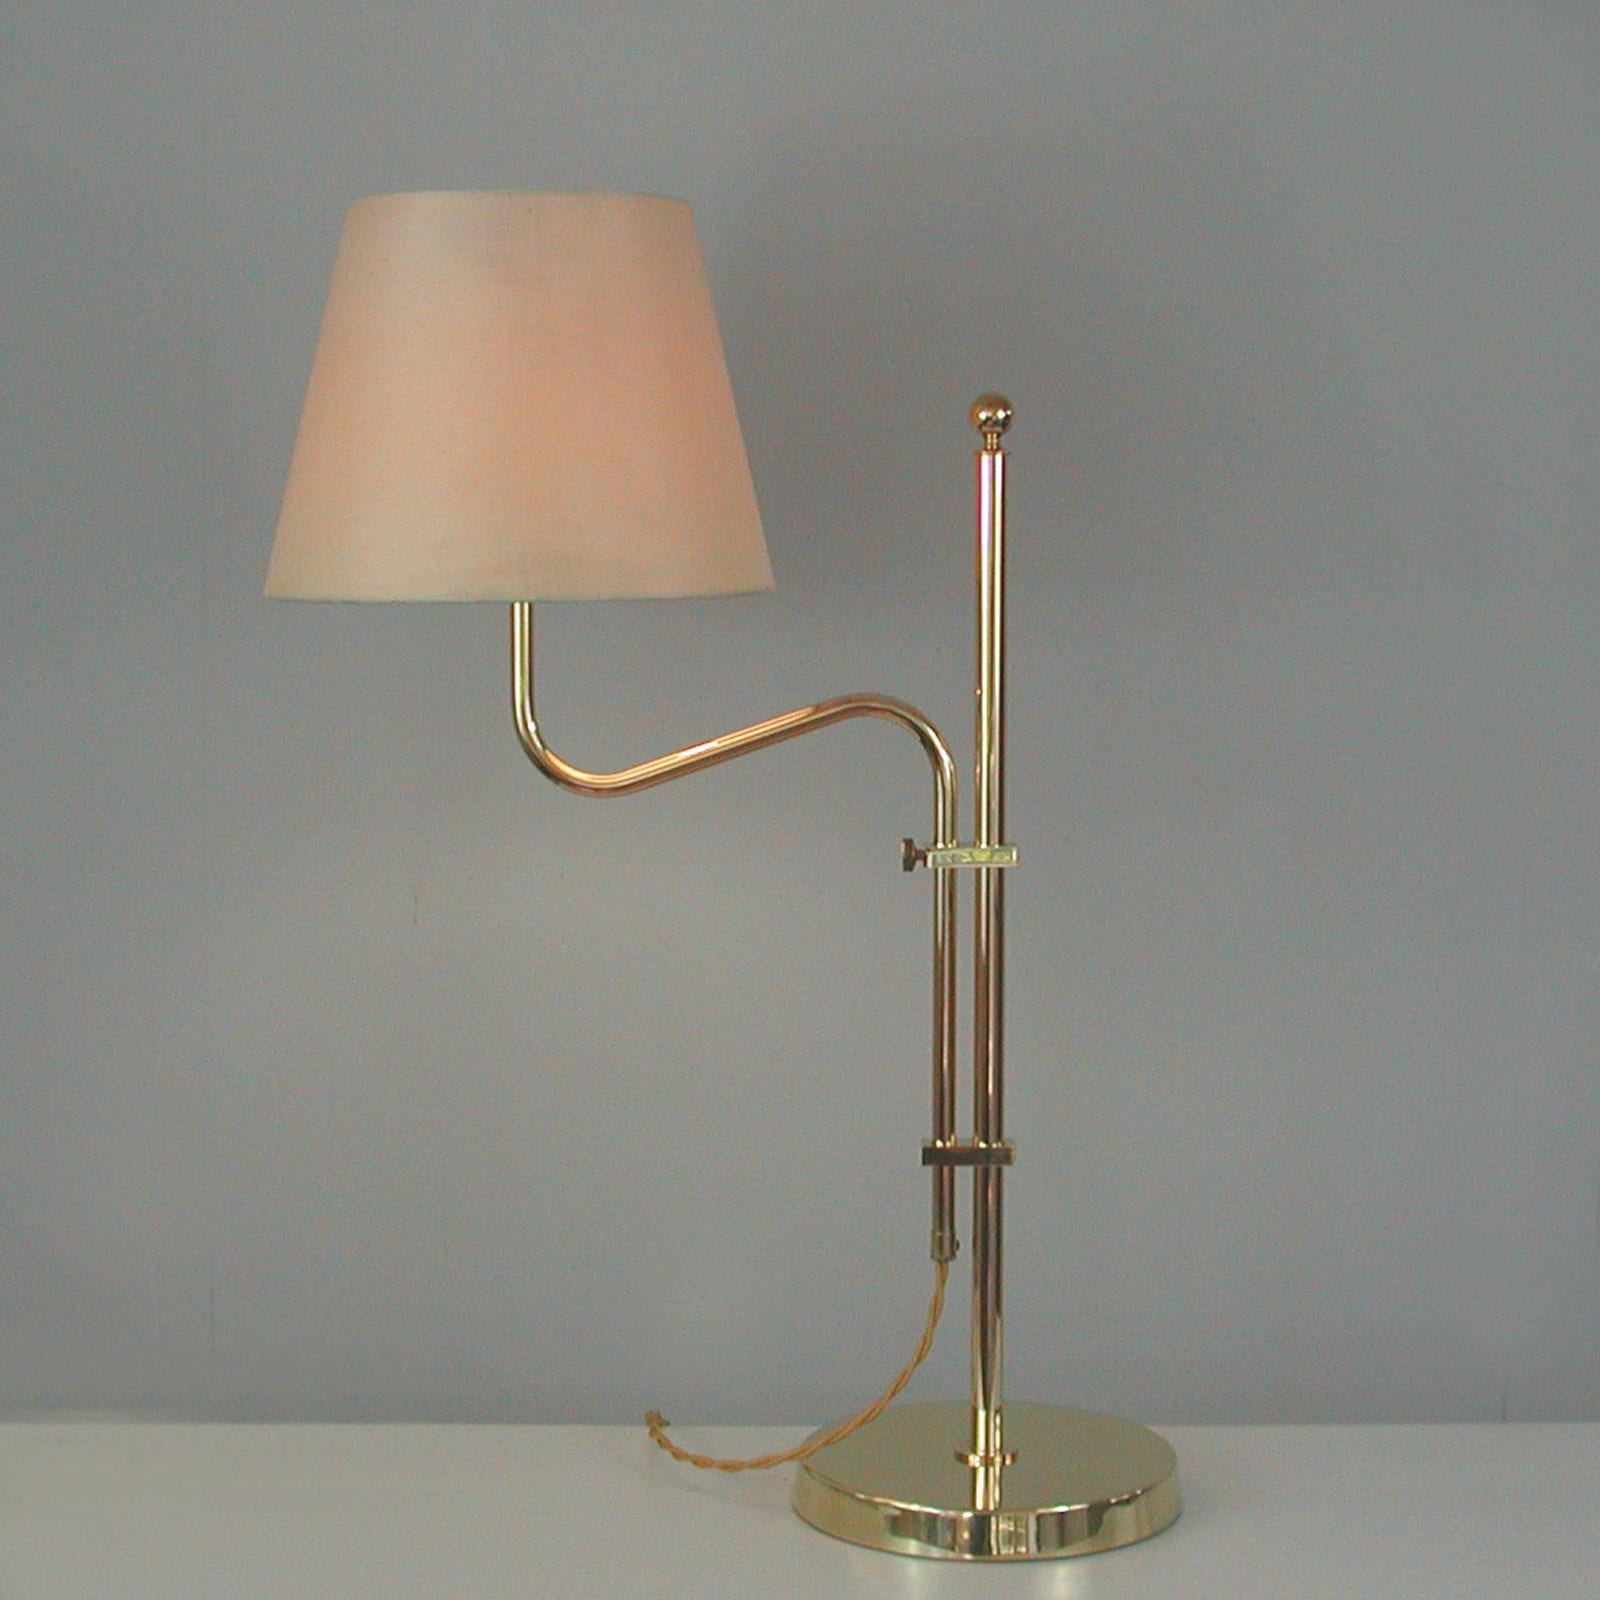 Mid-Century Modern Adjustable Brass Table Lamp by Bergboms, Sweden, 1950s For Sale